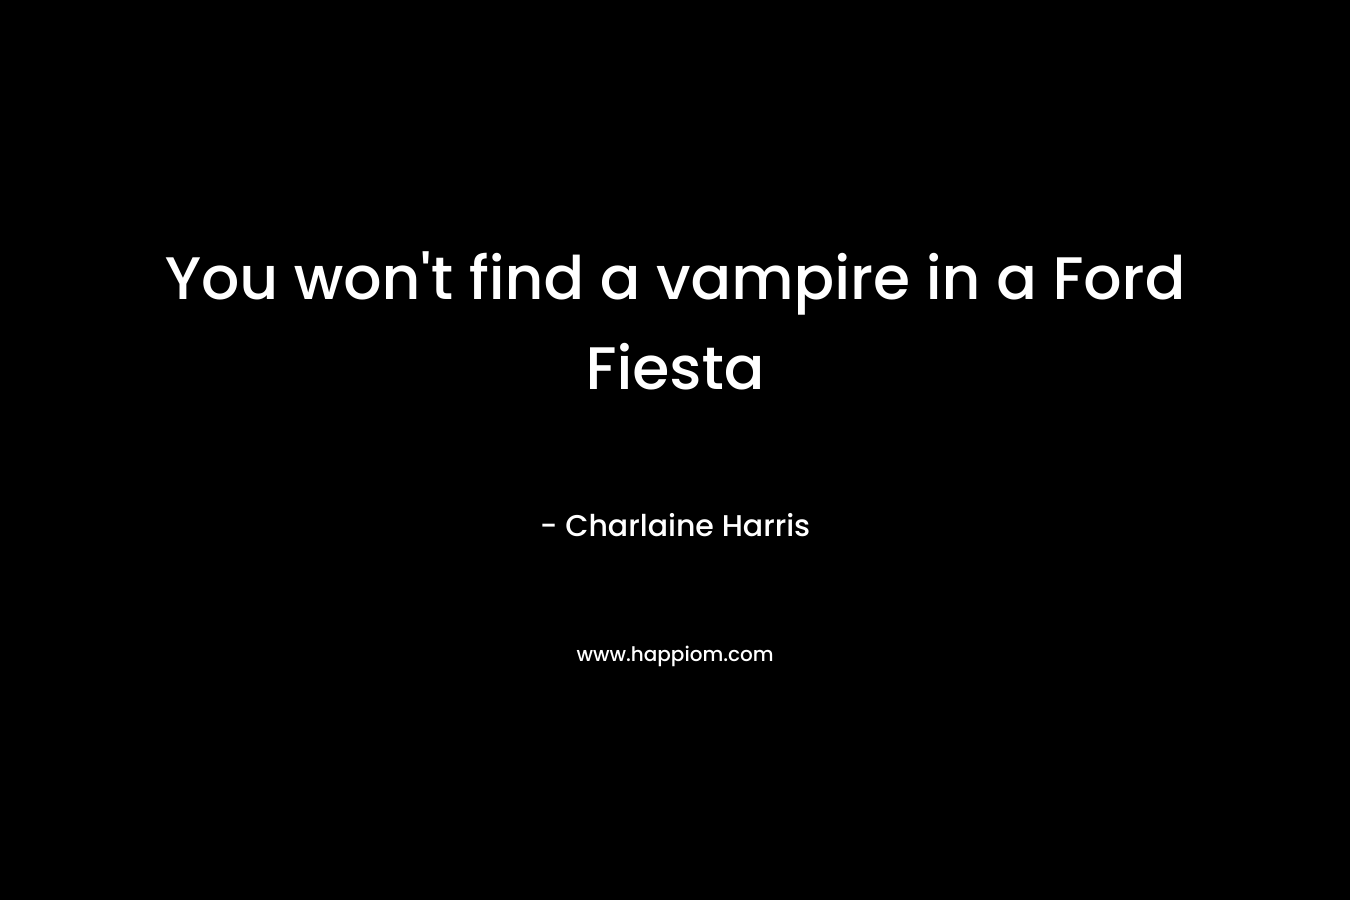 You won’t find a vampire in a Ford Fiesta – Charlaine Harris